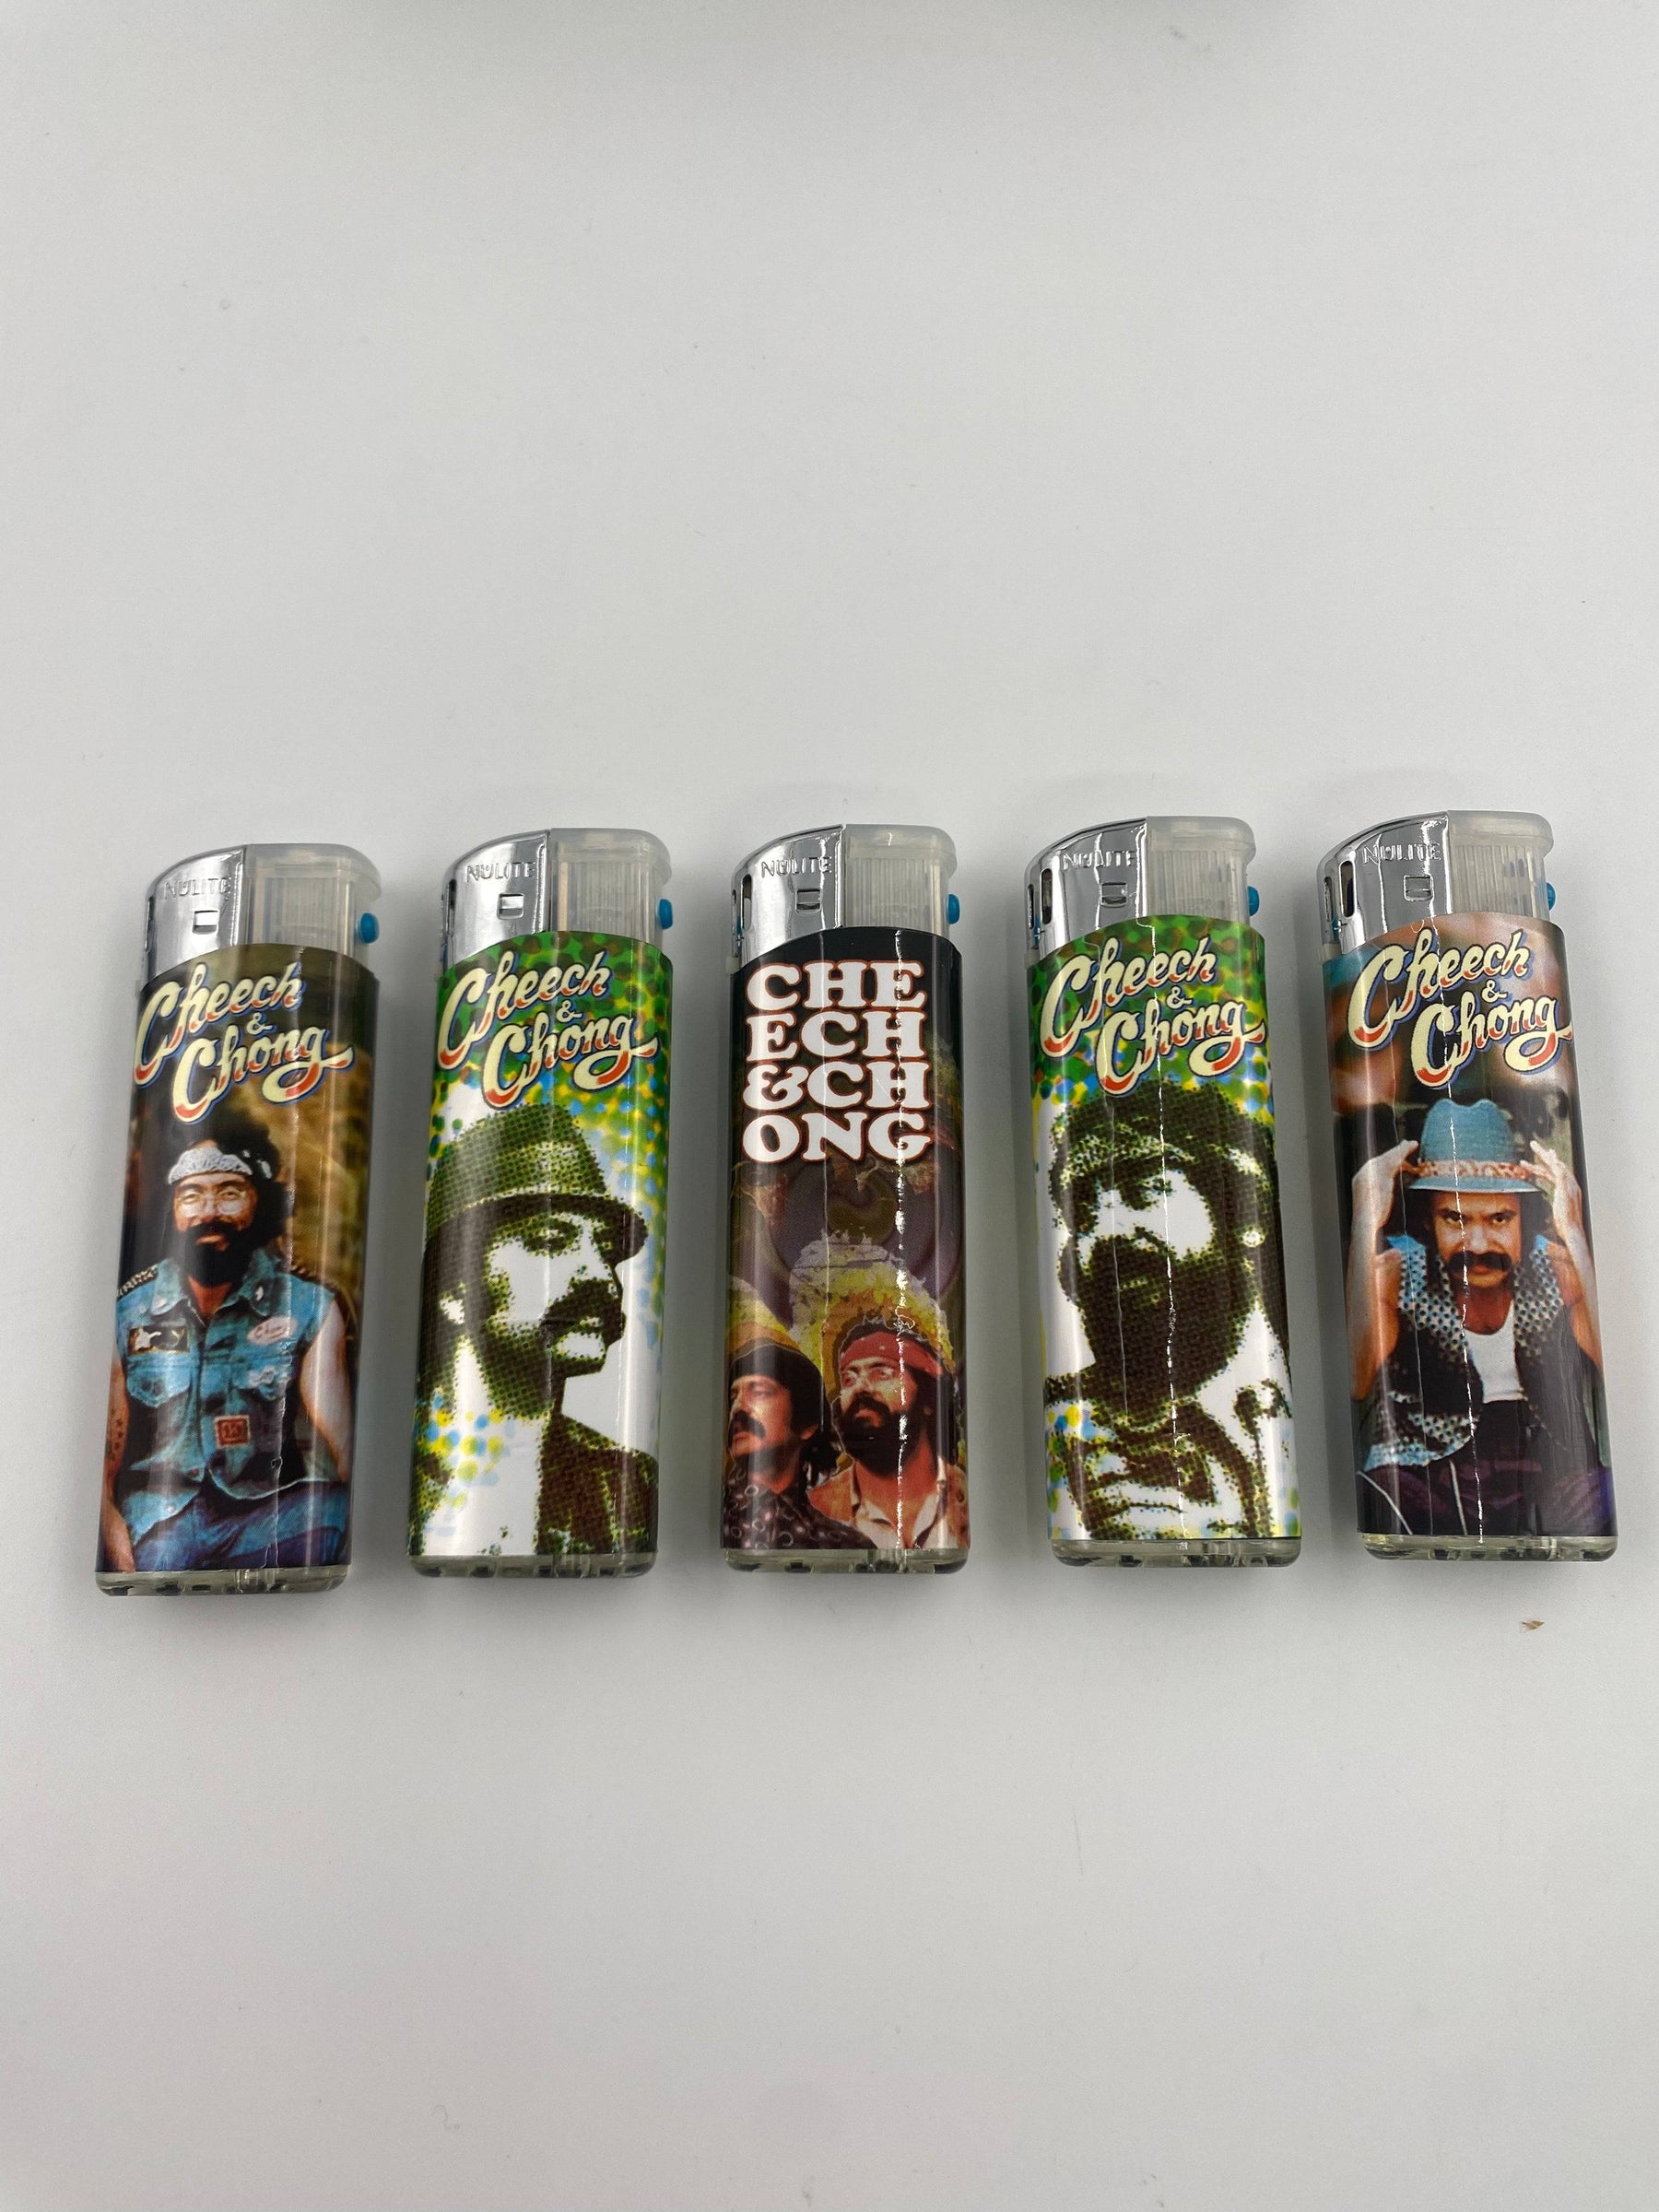 CHEECH & CHONG NULITE ELECTRONIC REFILLABLE LIGHTER 50 CT DISPLAY